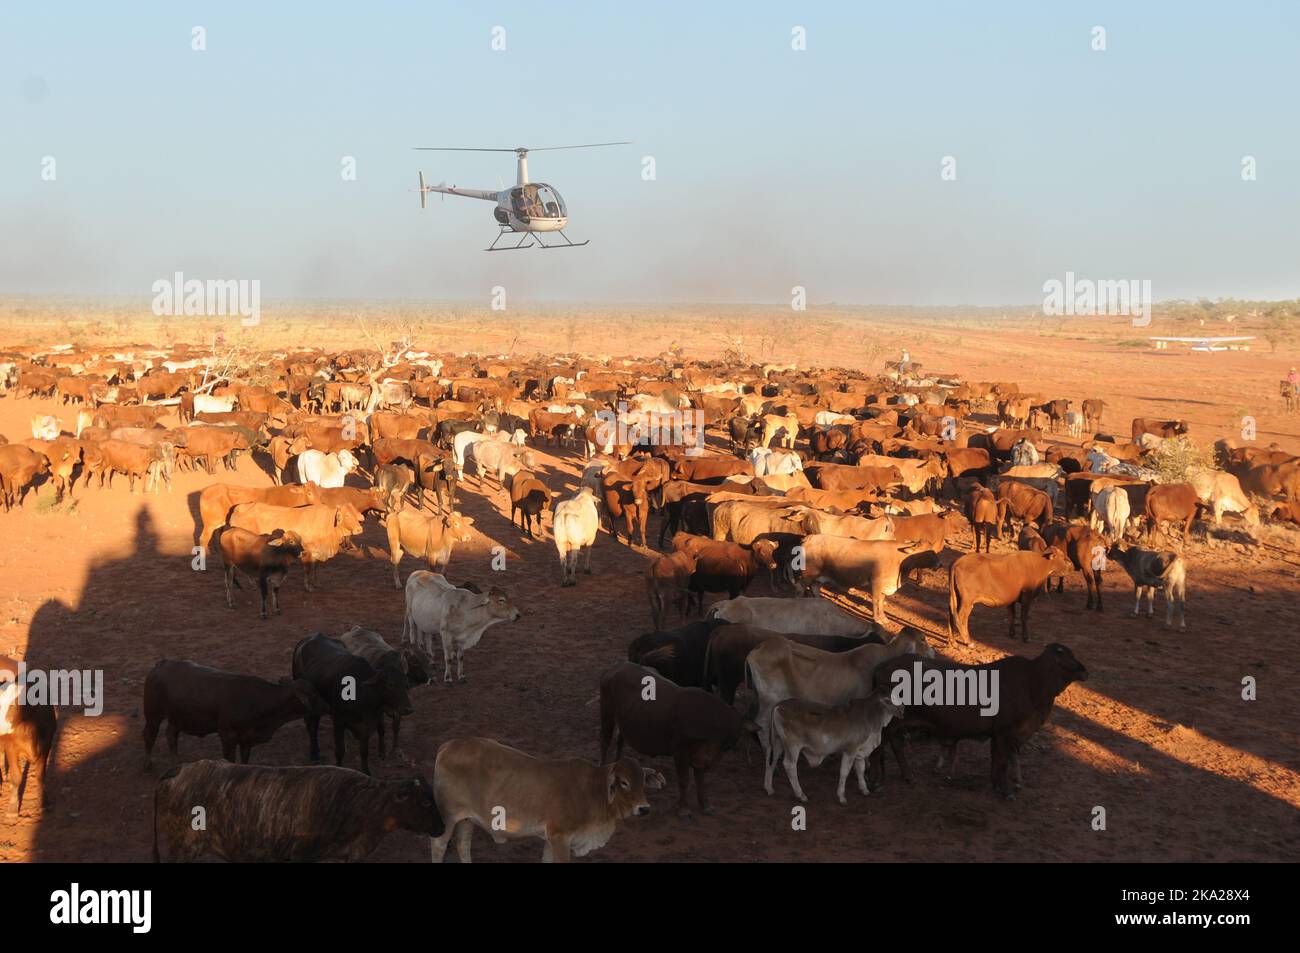 Aerial cattle mustering with a Robinson R22, in the outback of Australia Stock Photo